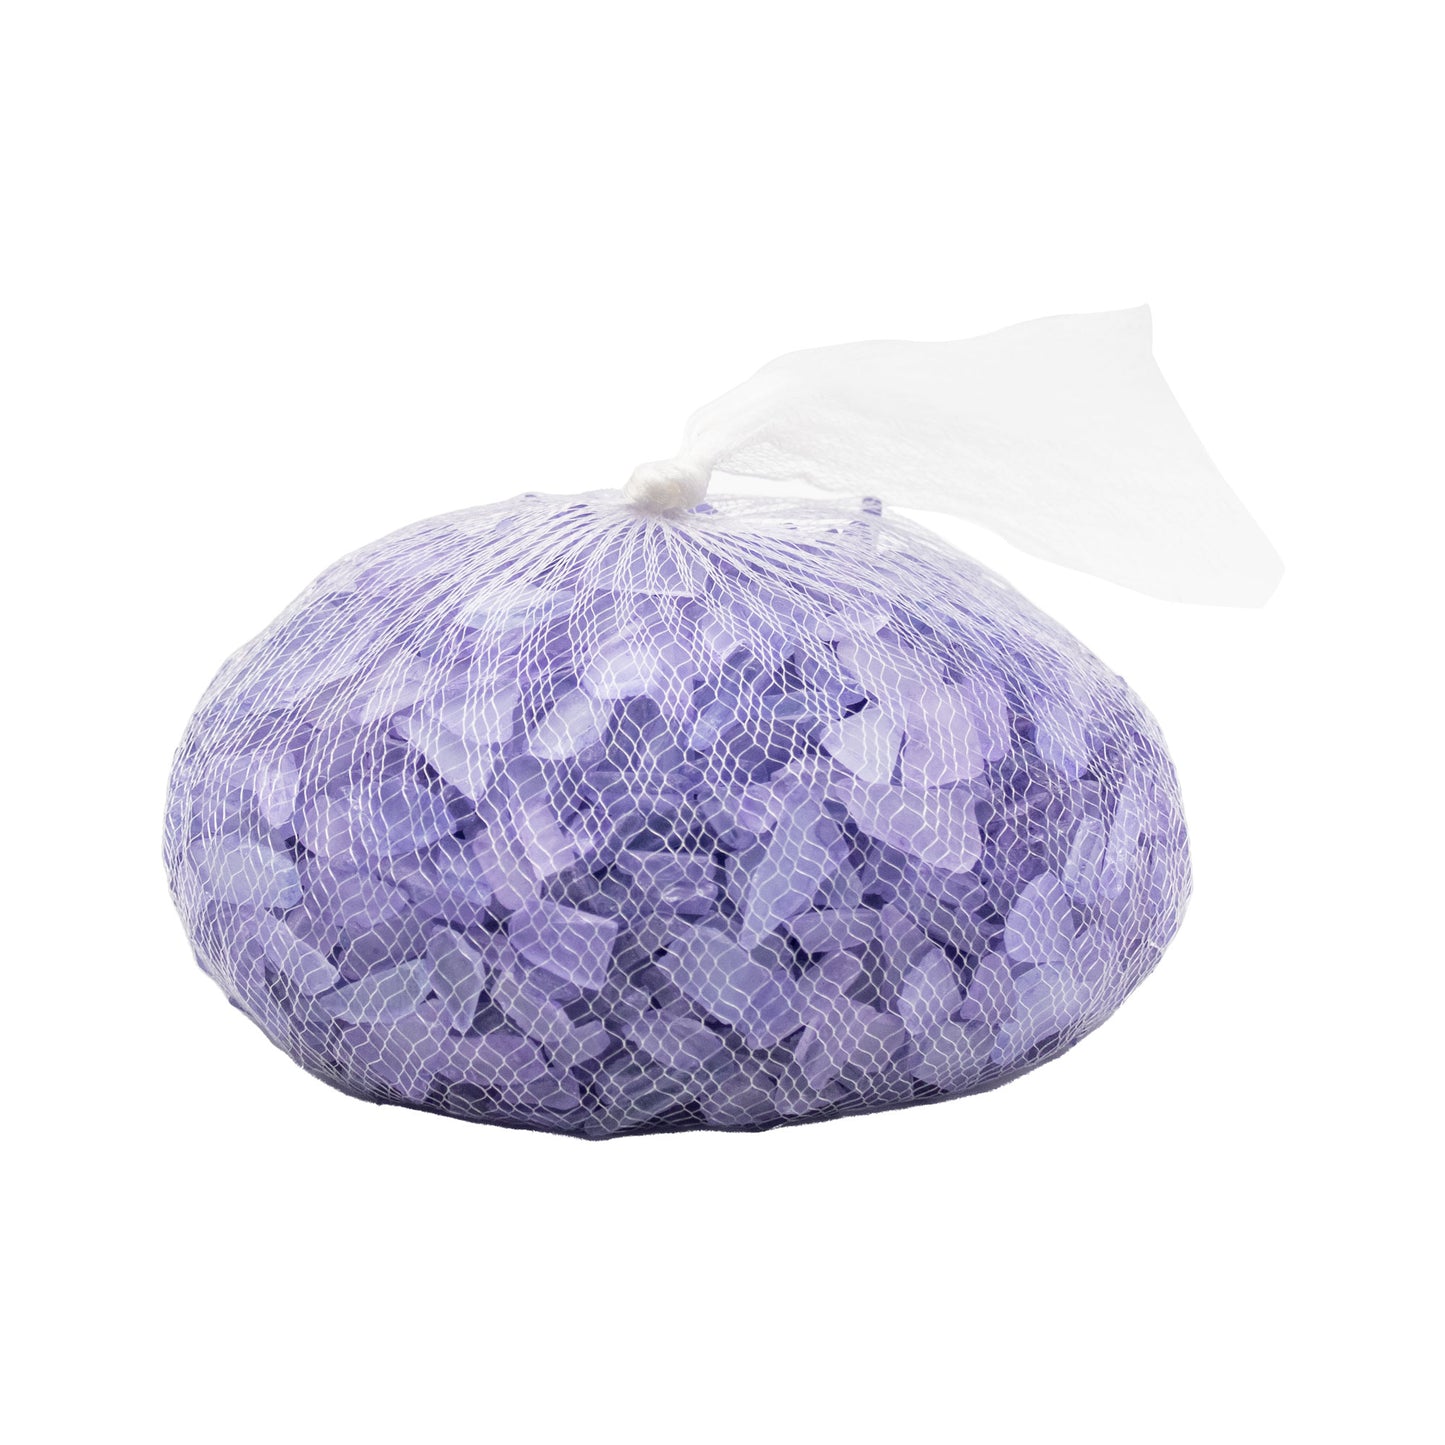 Lavender Frosted Sea Glass Pebbles - 4 lb